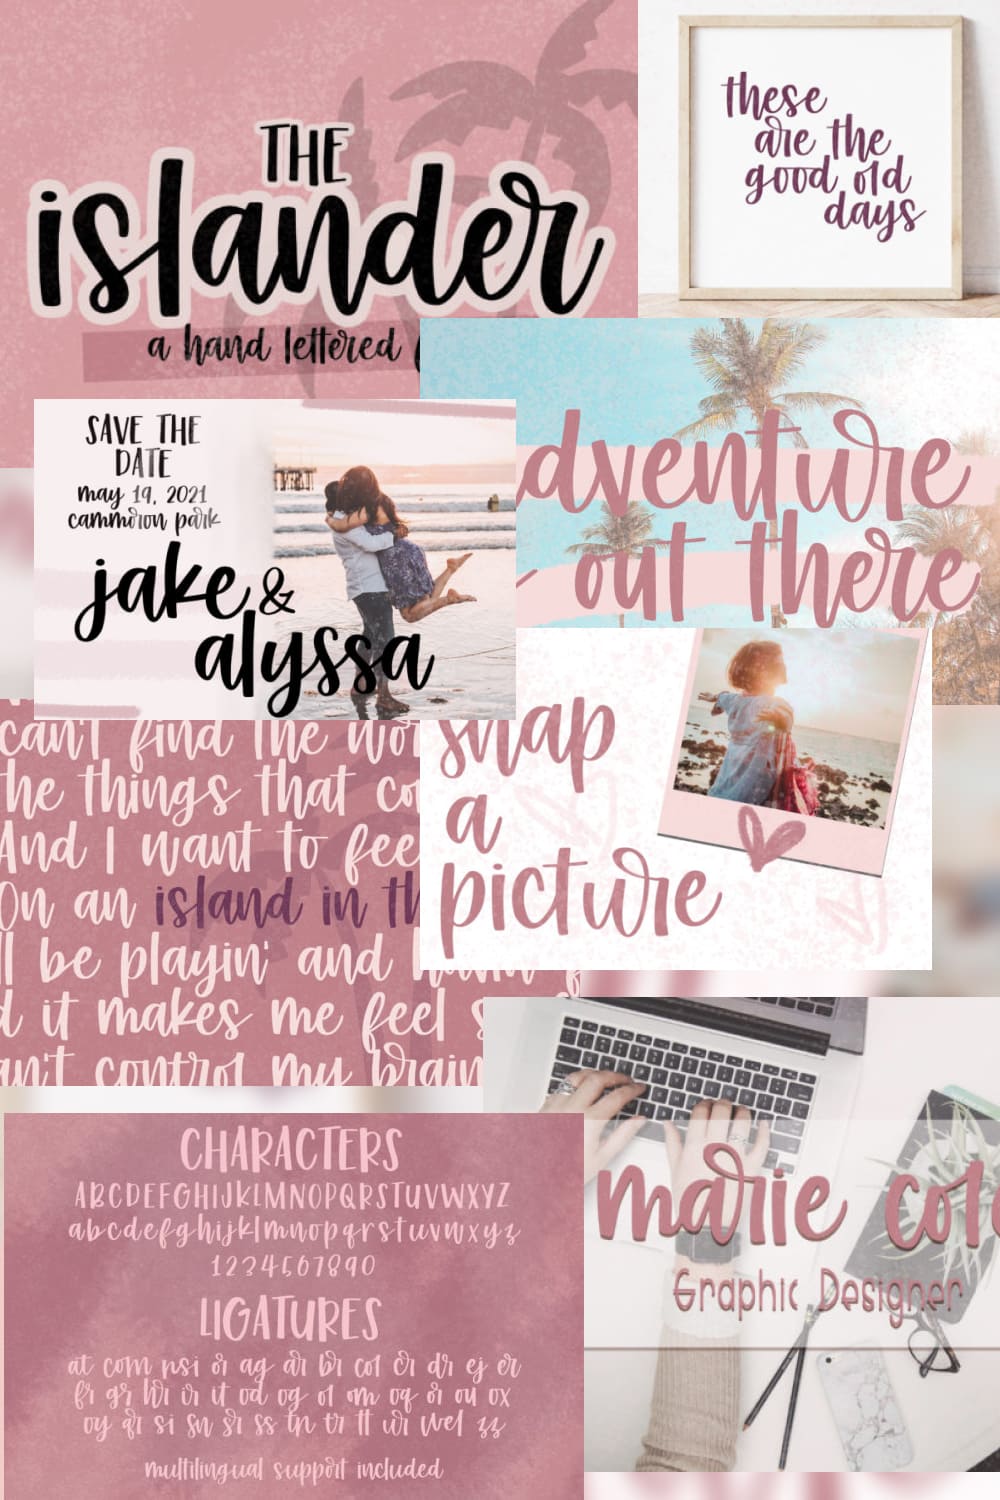 This font is a cool and fashionable handwritten font.